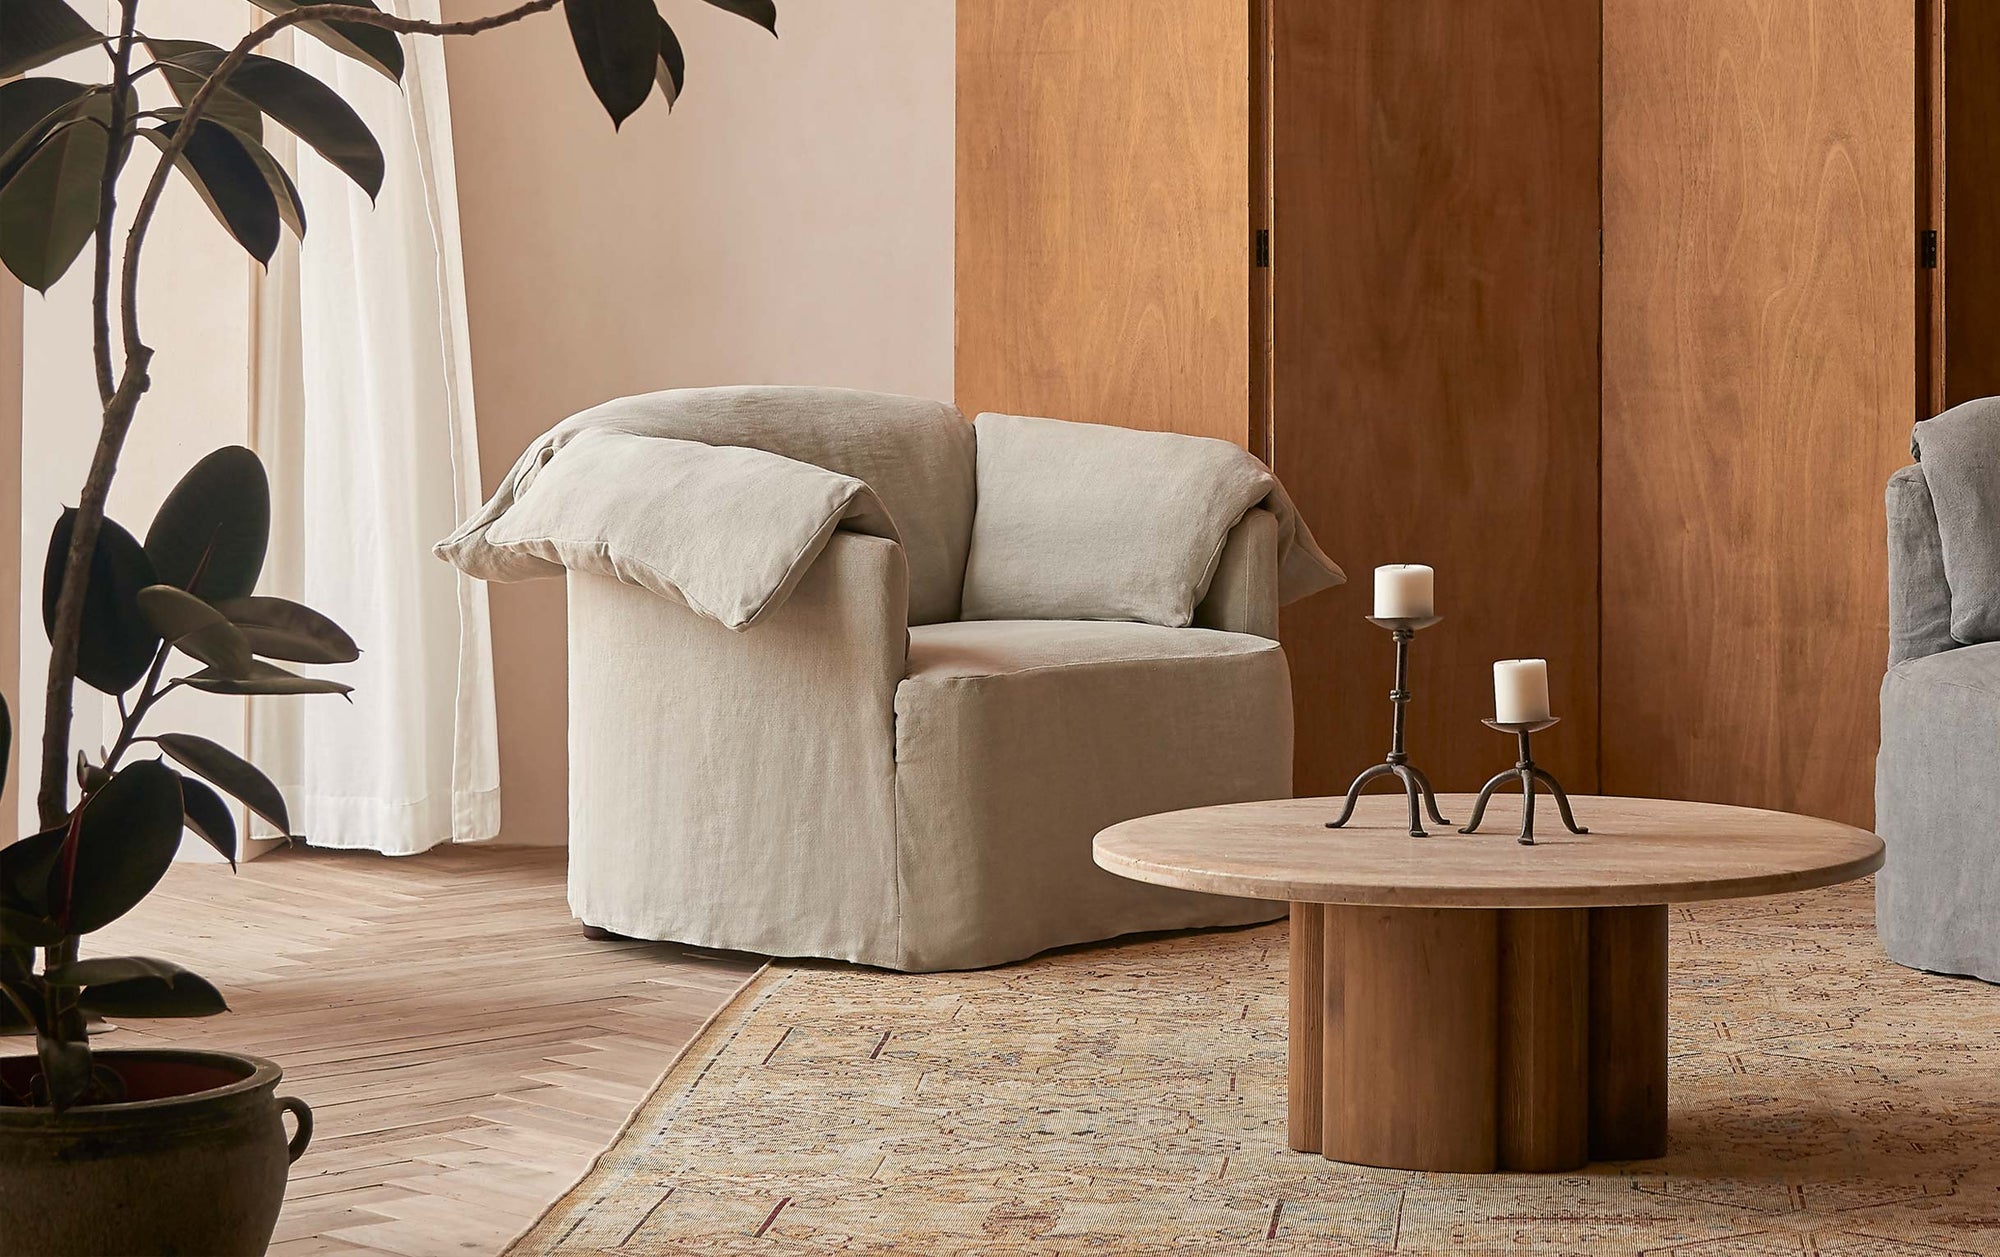 Loula chair in Jasmine Rice, a light warm greige Medium Weight Linen, placed in a room facing a coffee table